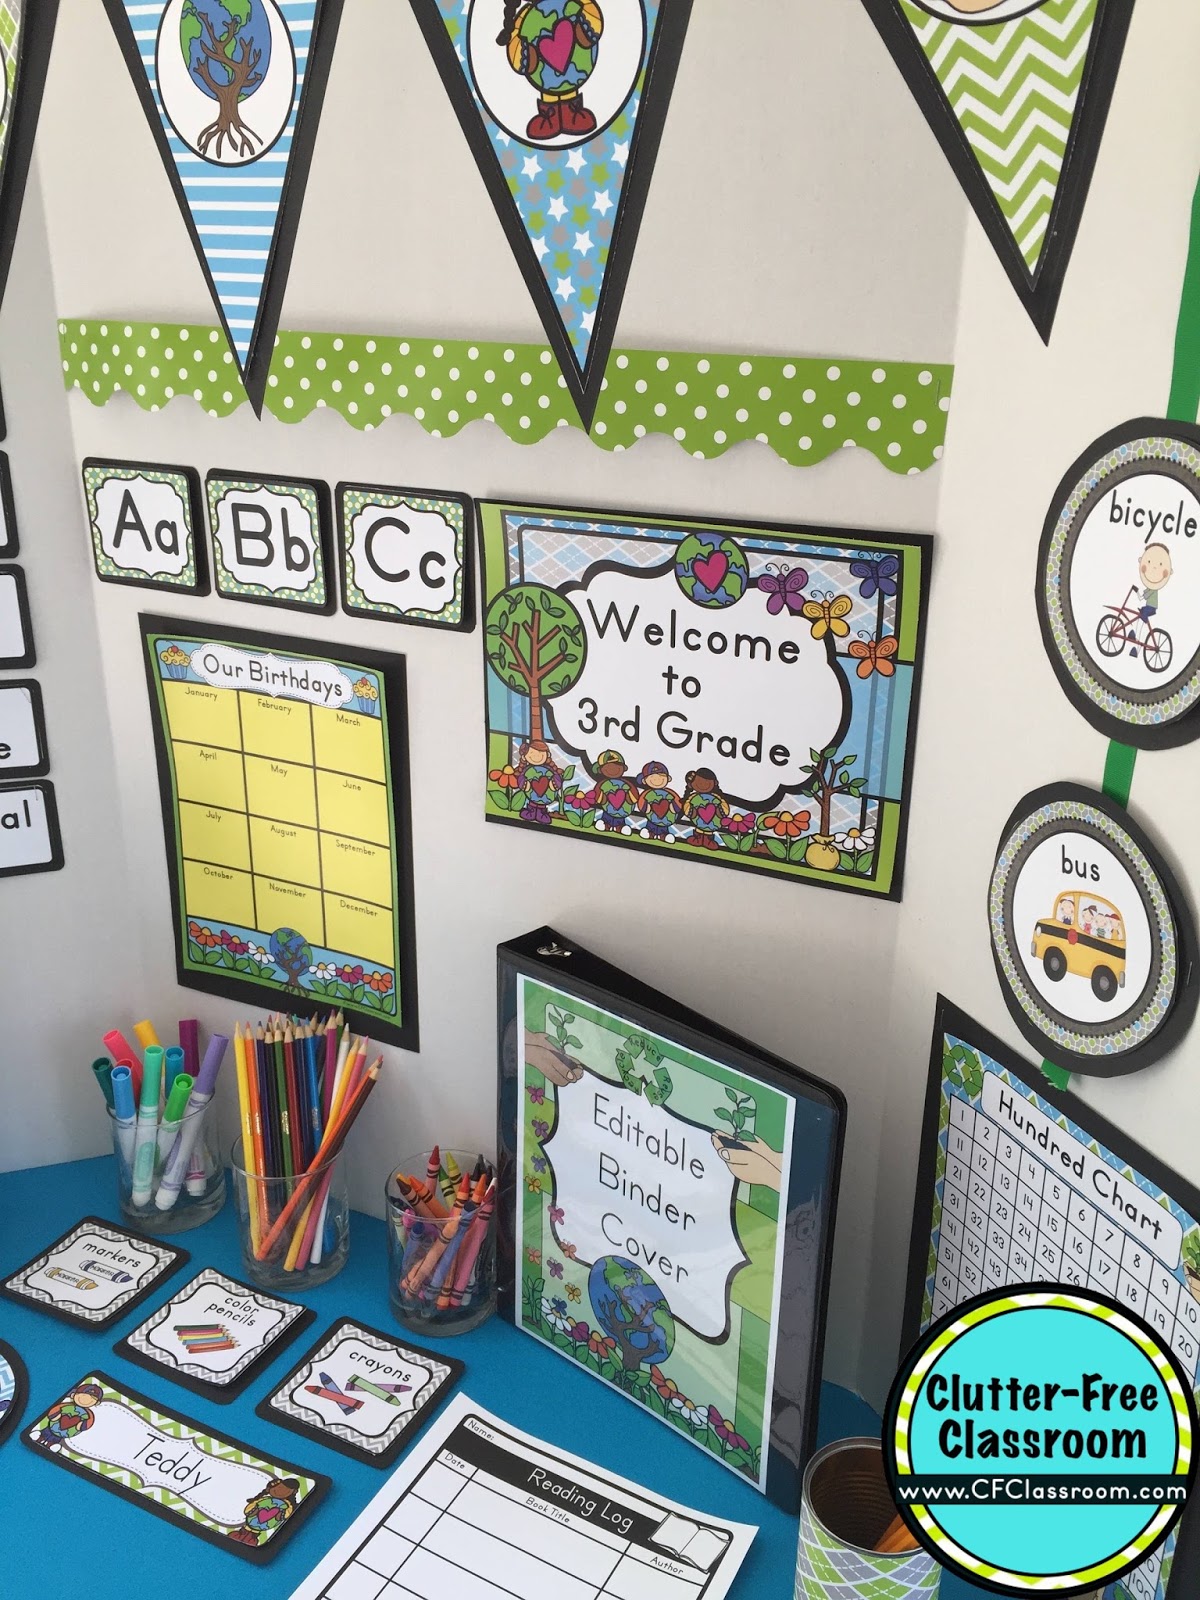 Are you planning a recycling themed classroom or thematic unit? This blog post provides great decoration tips and ideas for the best recycling theme yet! It has photos, ideas, supplies & printable classroom decor to will make set up easy and affordable. You can create a recycling theme on a budget!